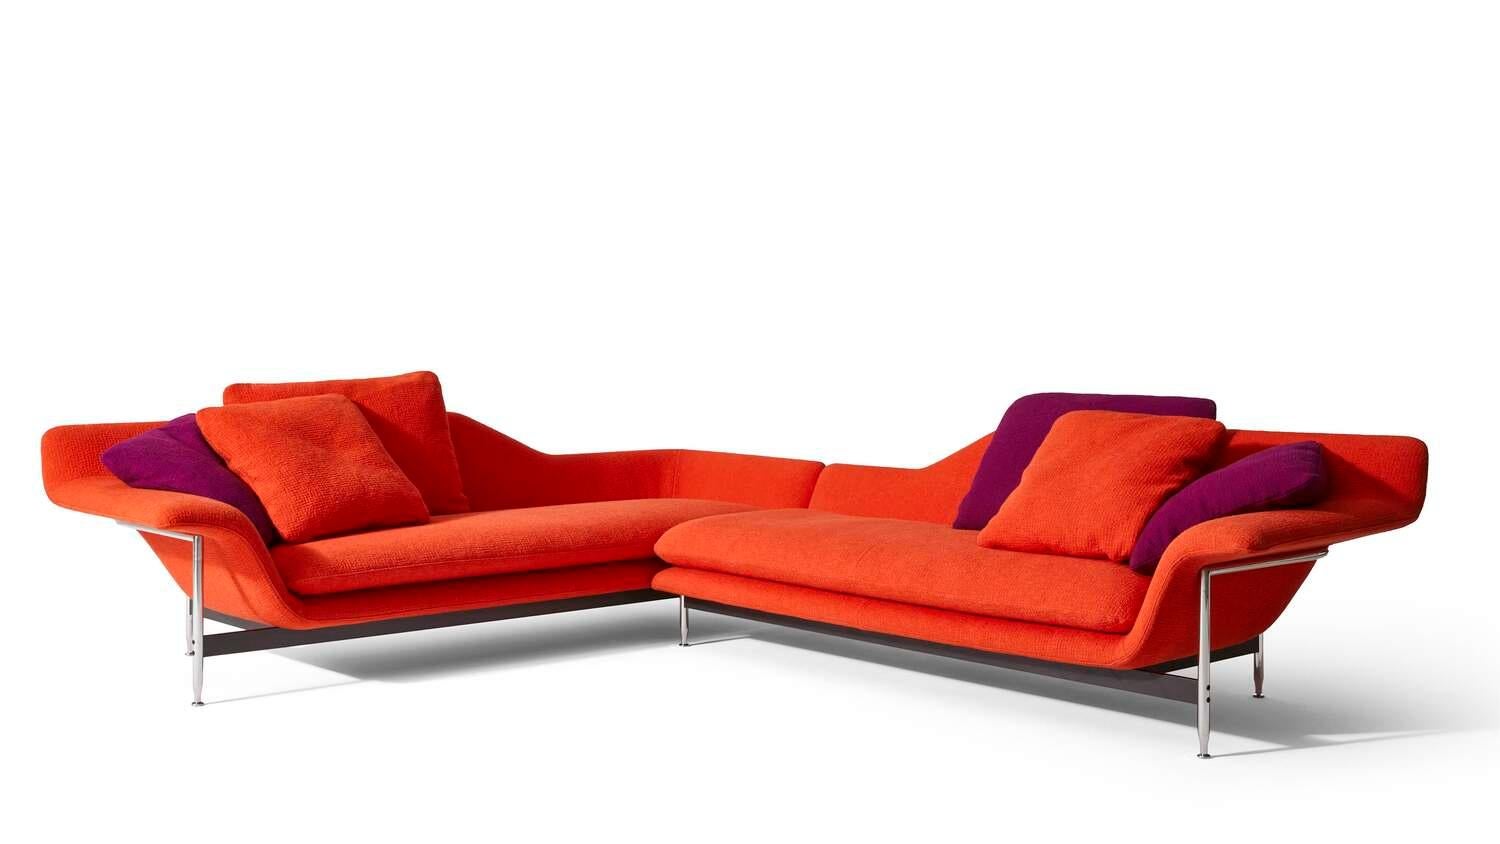 Set of Two Antonio Citterio Esosoft Sofas by Cassina In New Condition For Sale In Barcelona, Barcelona